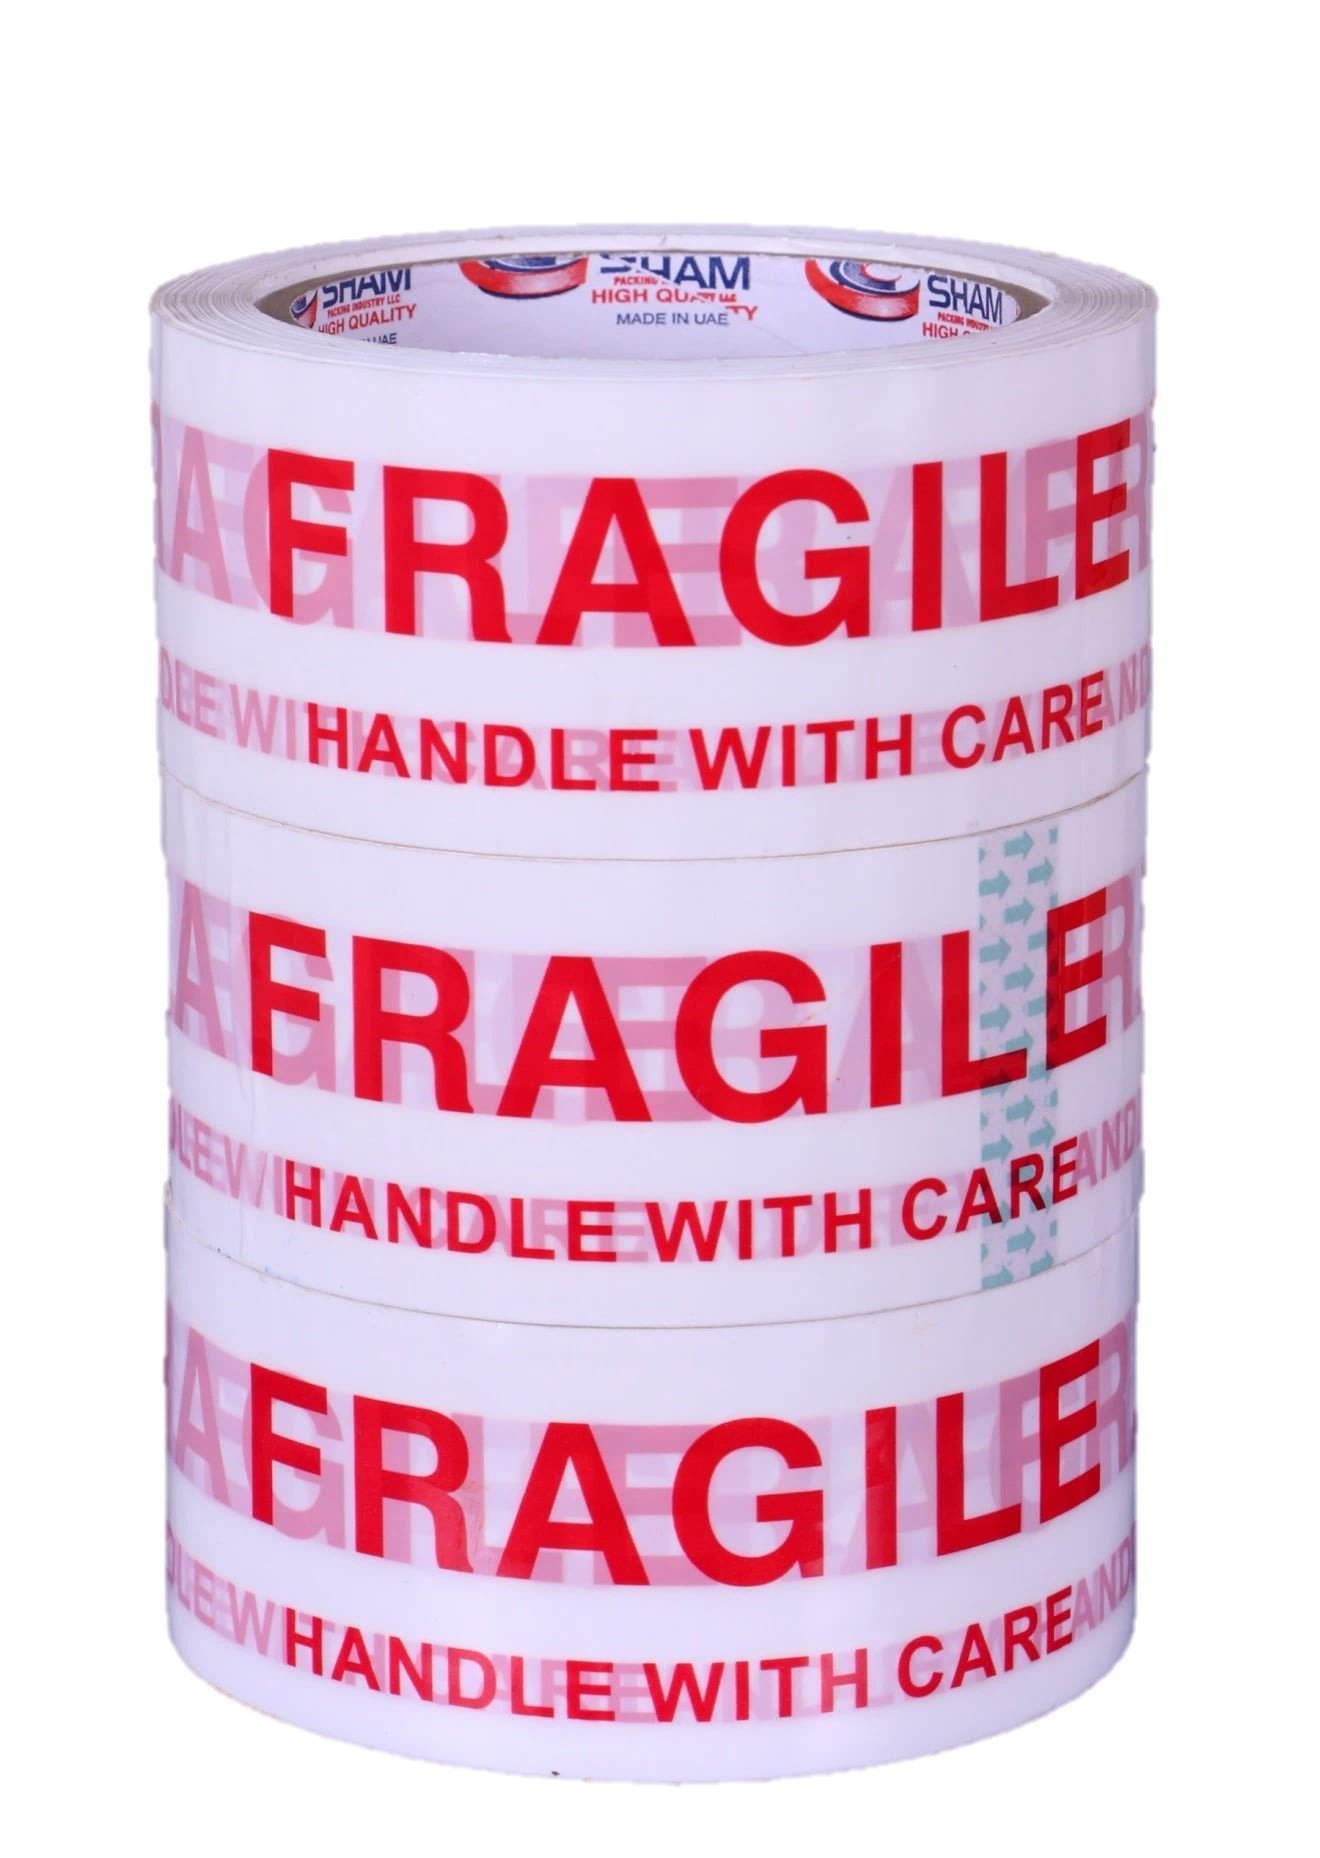 Fragile Adhesive tape 2 inches